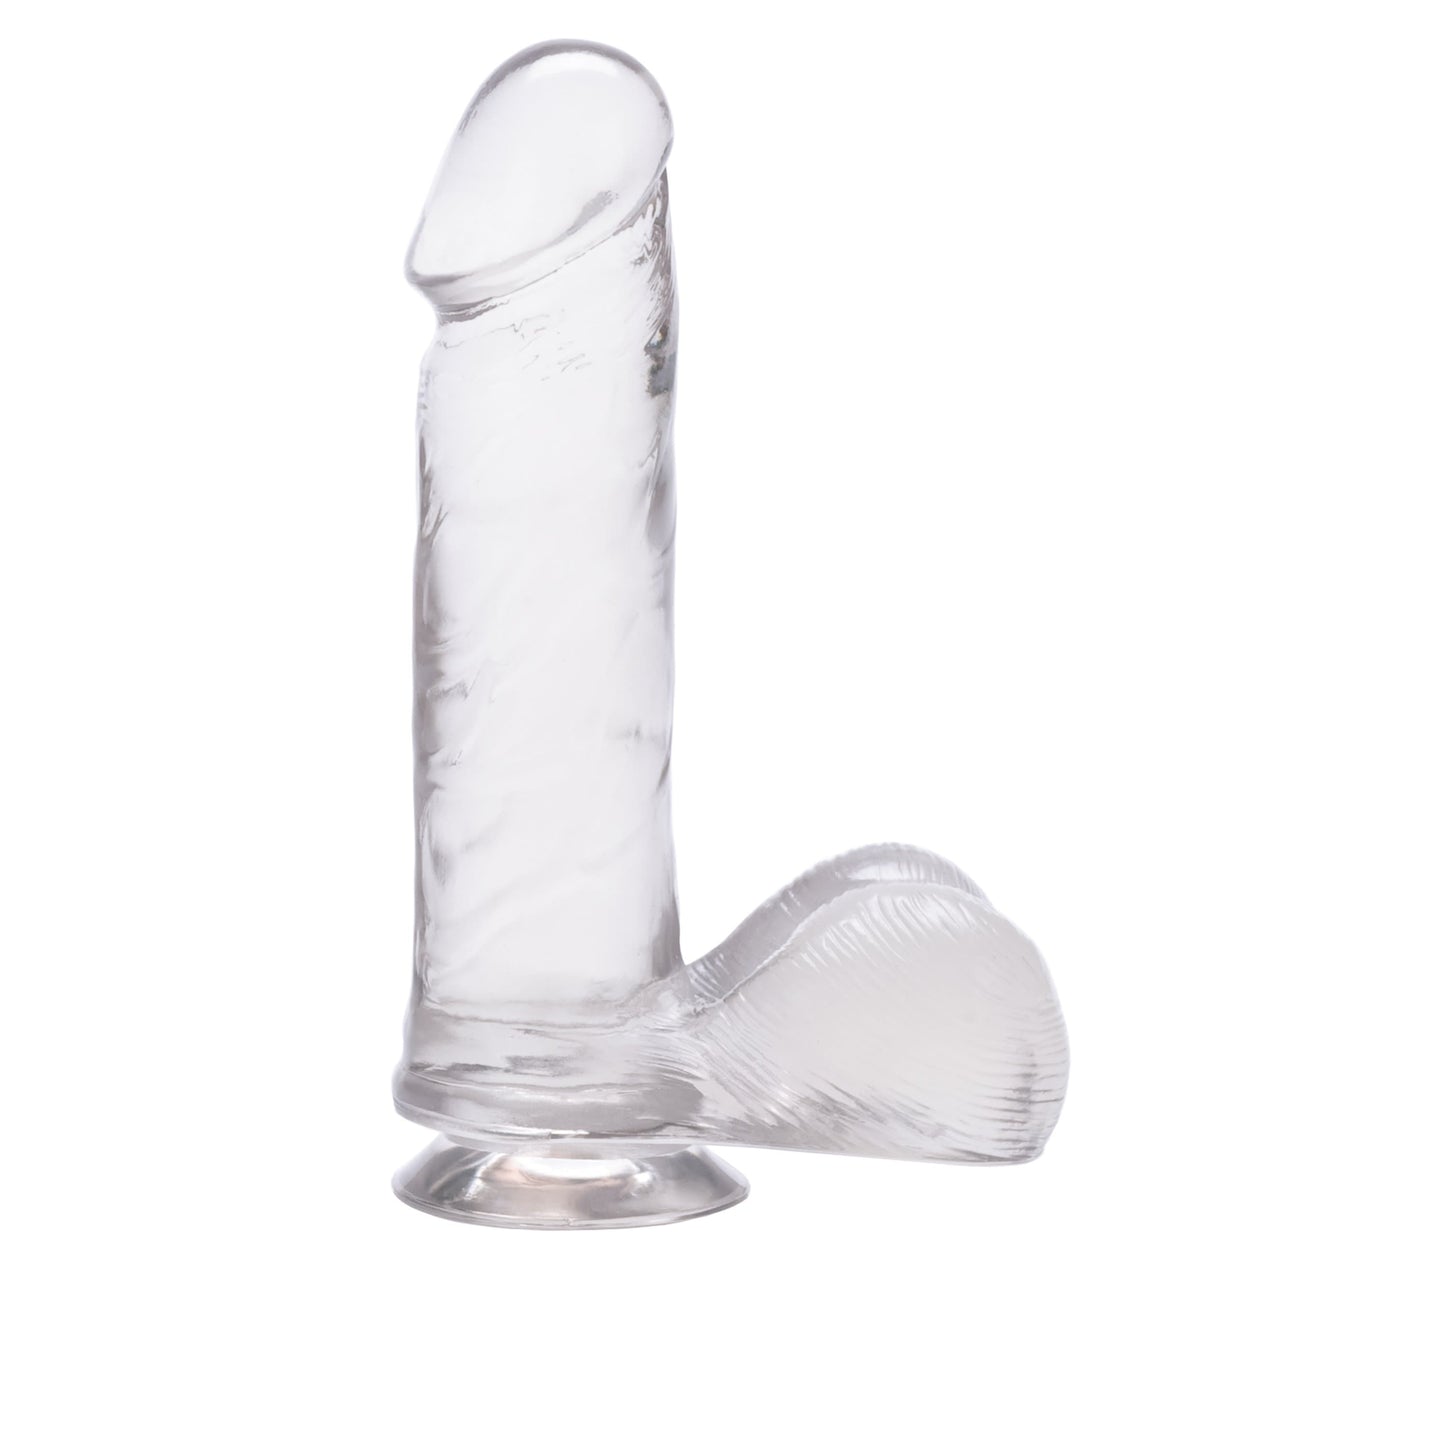 Jelly Royale 6" Dildo - Clear - Thorn & Feather